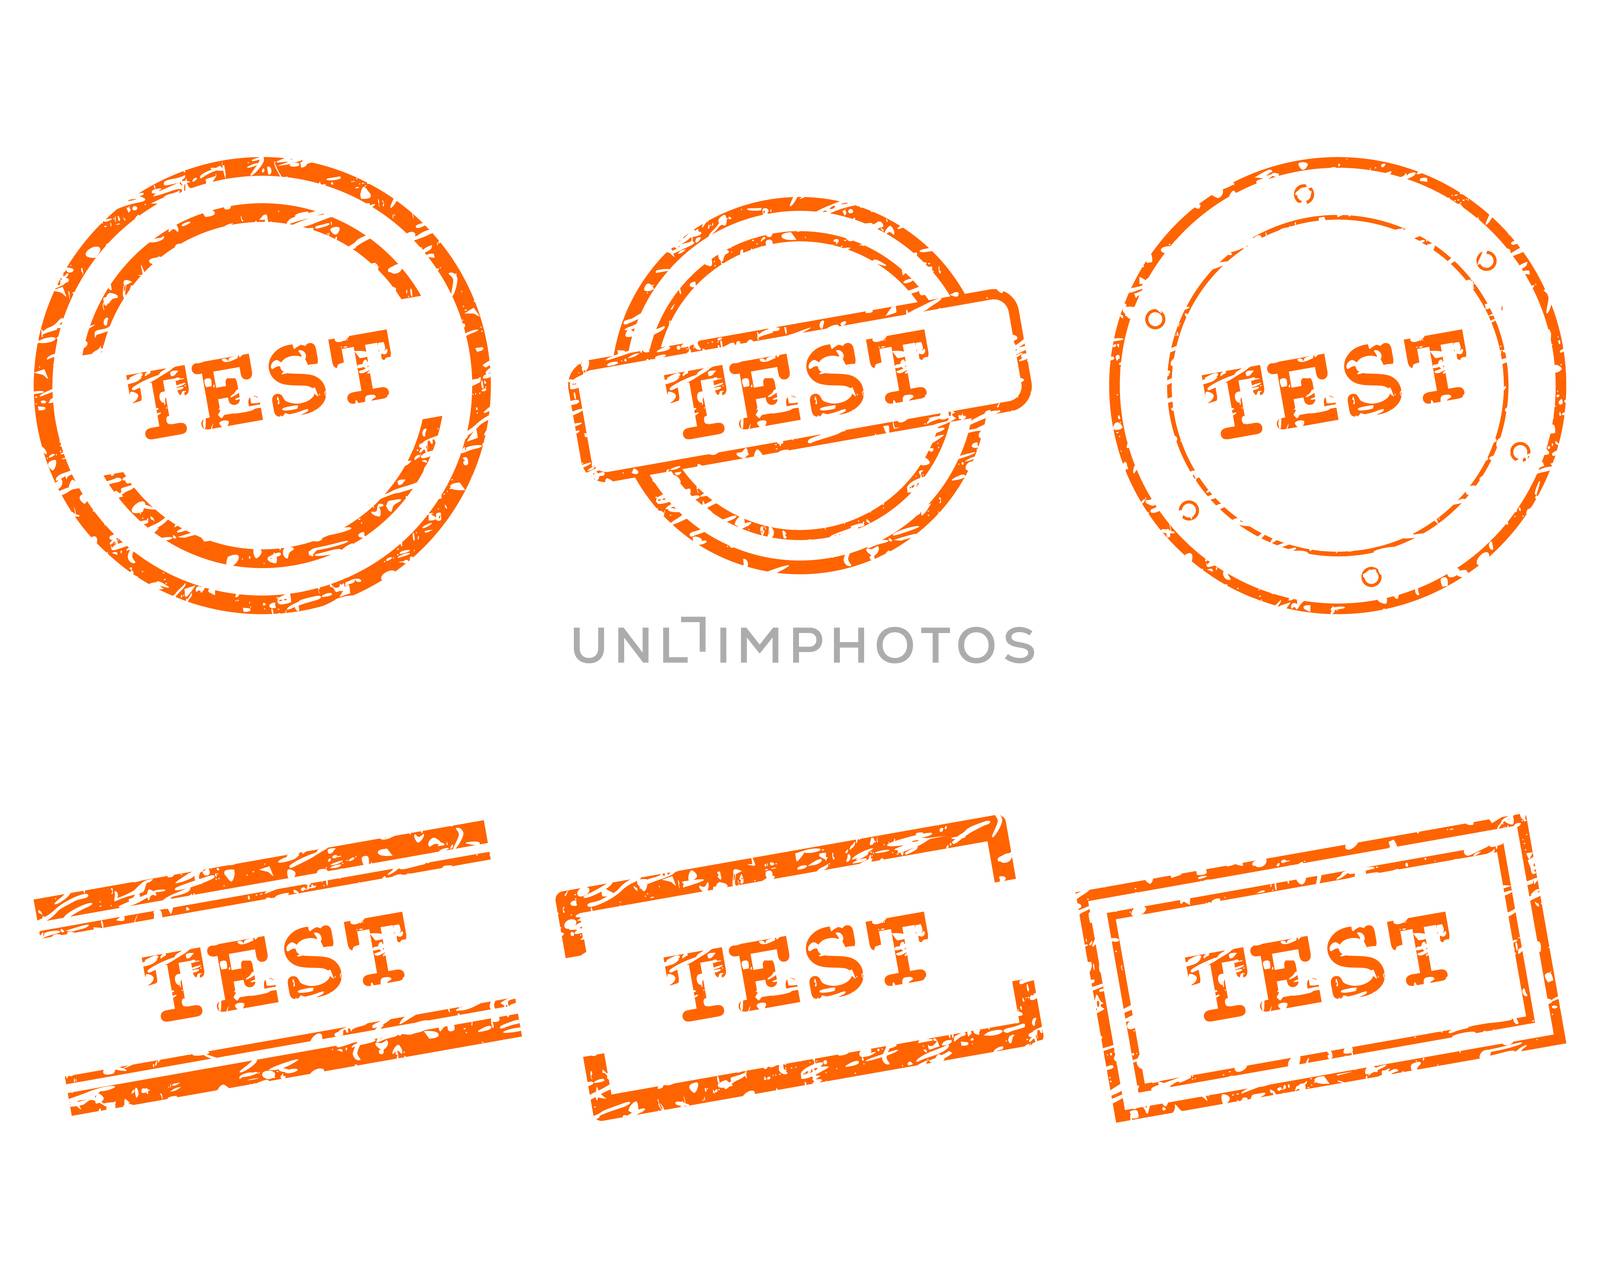 Test stamps